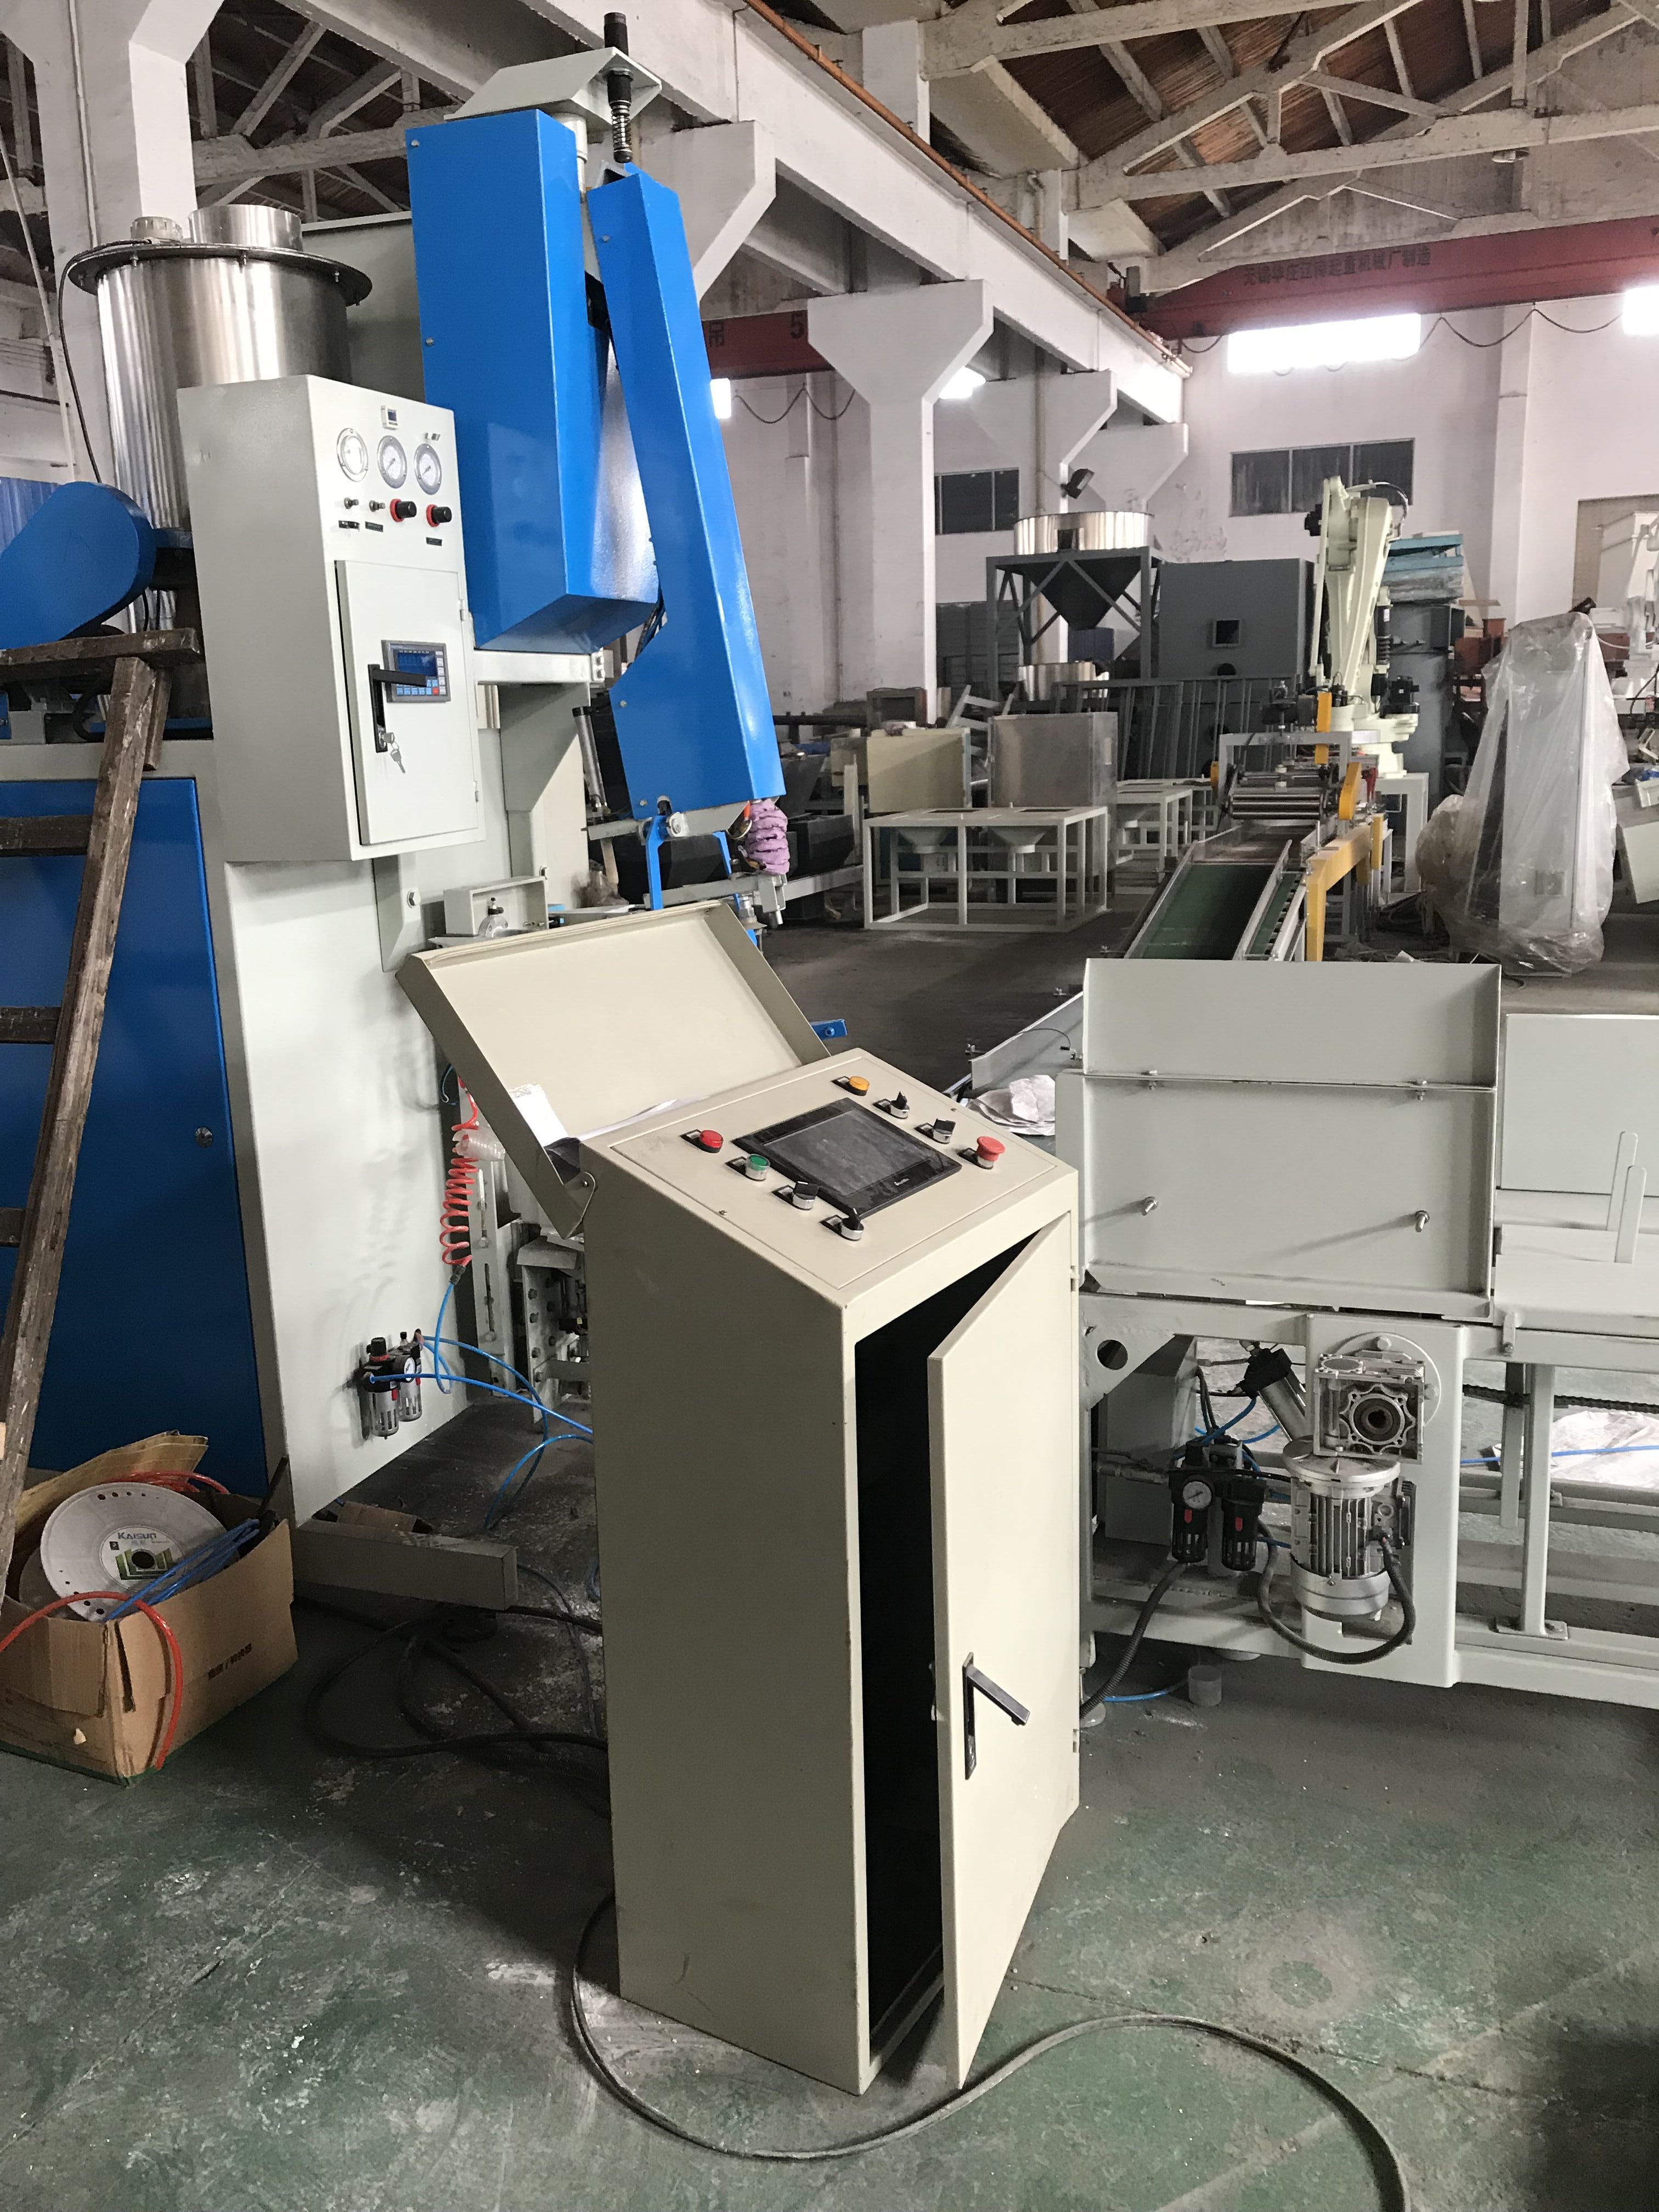 Fully Automatic Valve Bag Packing Machine Acid Powder Packing Machine 700bags compost bagging line Mineral Premix Bagging Machine Full automatic valve bagger with bag placer 25kg Mineral Powder Baggin